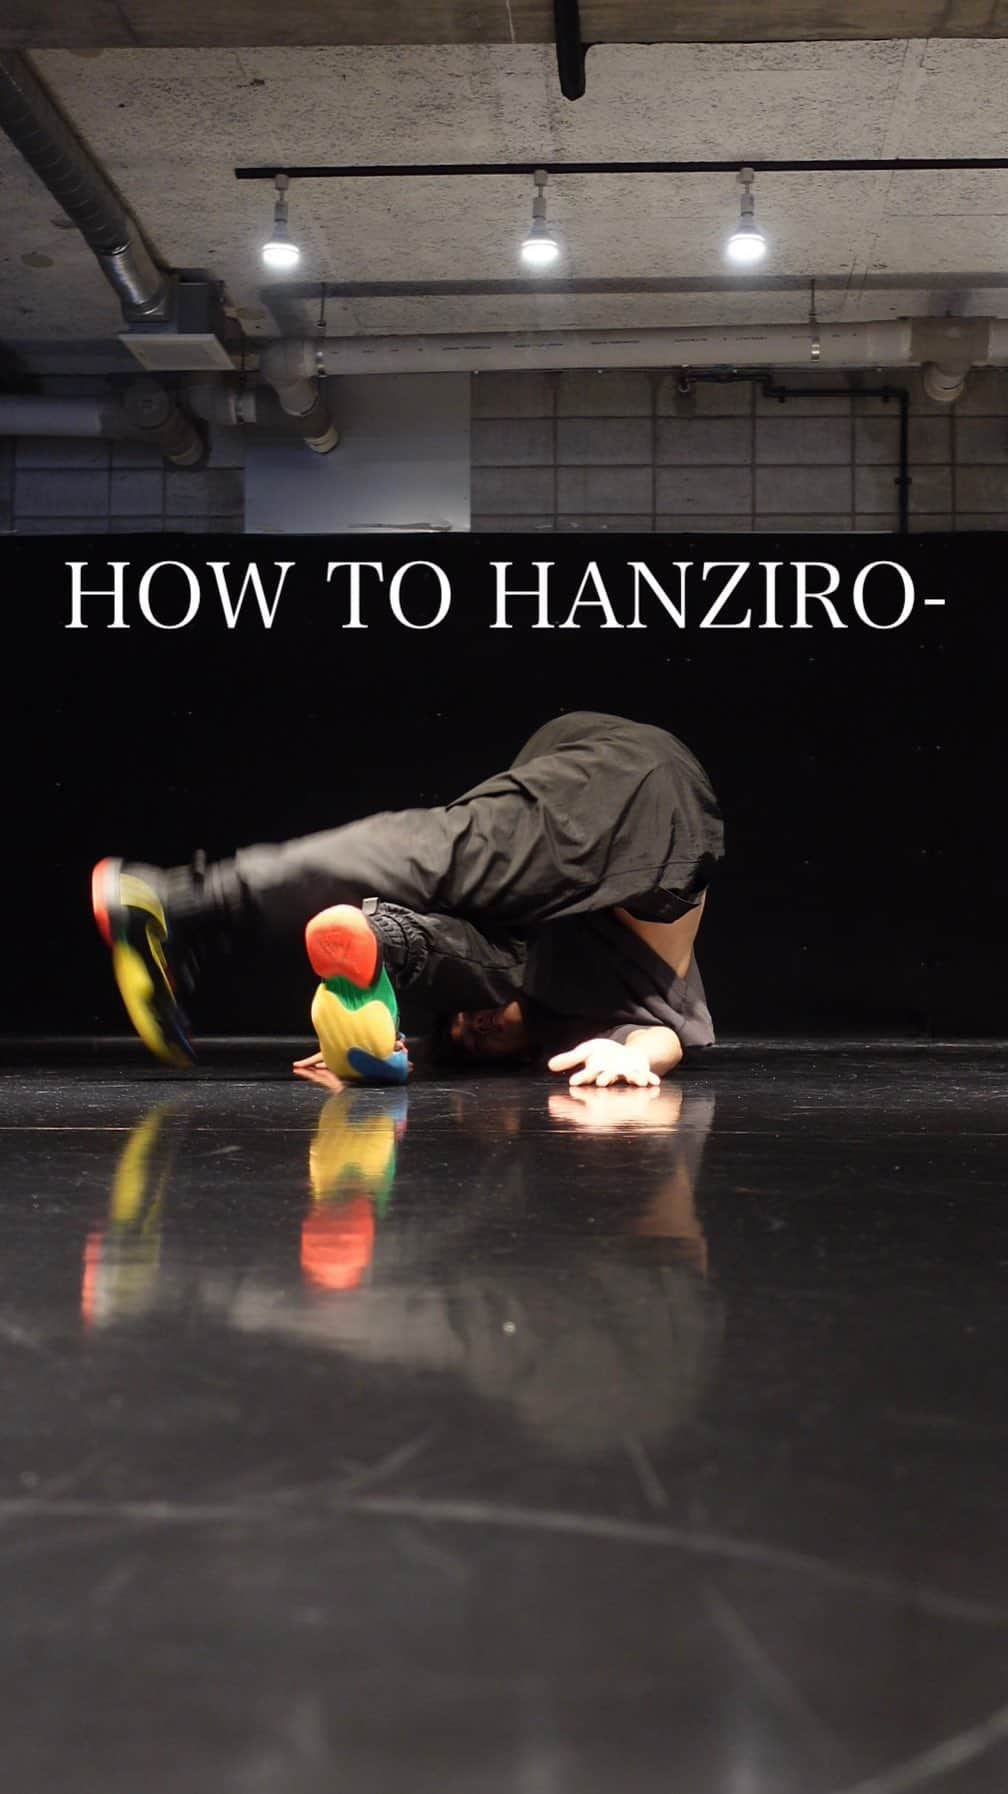 asukaのインスタグラム：「The easy way to learn 【HANZIRO-】   Everybody can do this skill 🔥   What do you think?🤔   Lectured by @bboy_asuka   If you can master it, let me know in the comments😉   ↓↓↓↓   #dance #breaking #breakdance #bboy #powermove #powermoves #acrobatics #tricking #parkour #gymnastics #movement #capoeira #ブレイキン #超人」